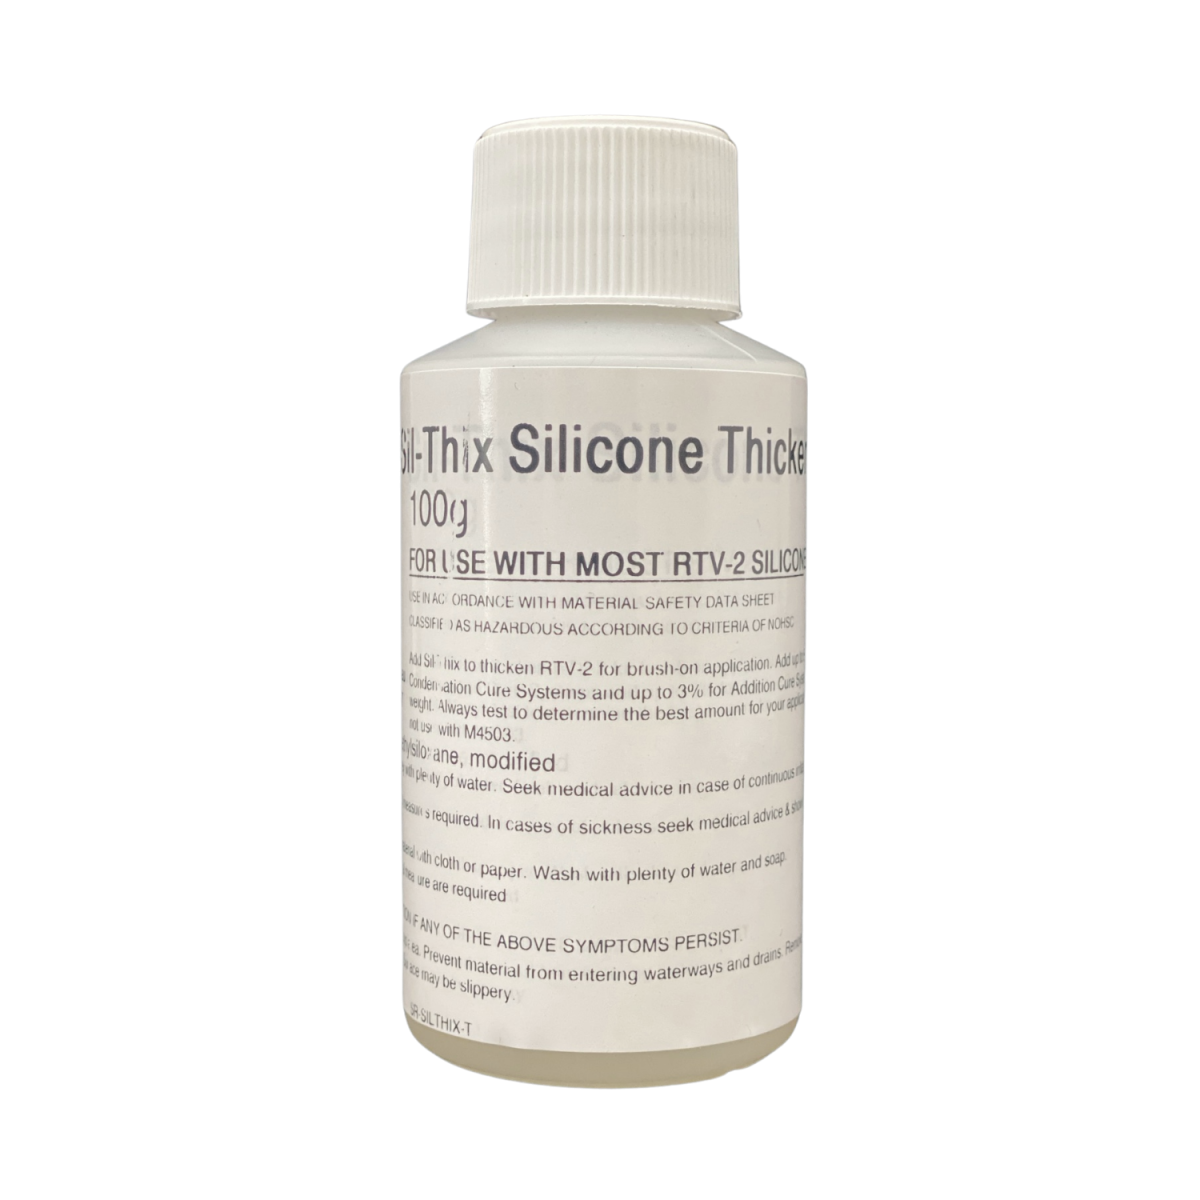 Sil-Thix Silicone Thickener